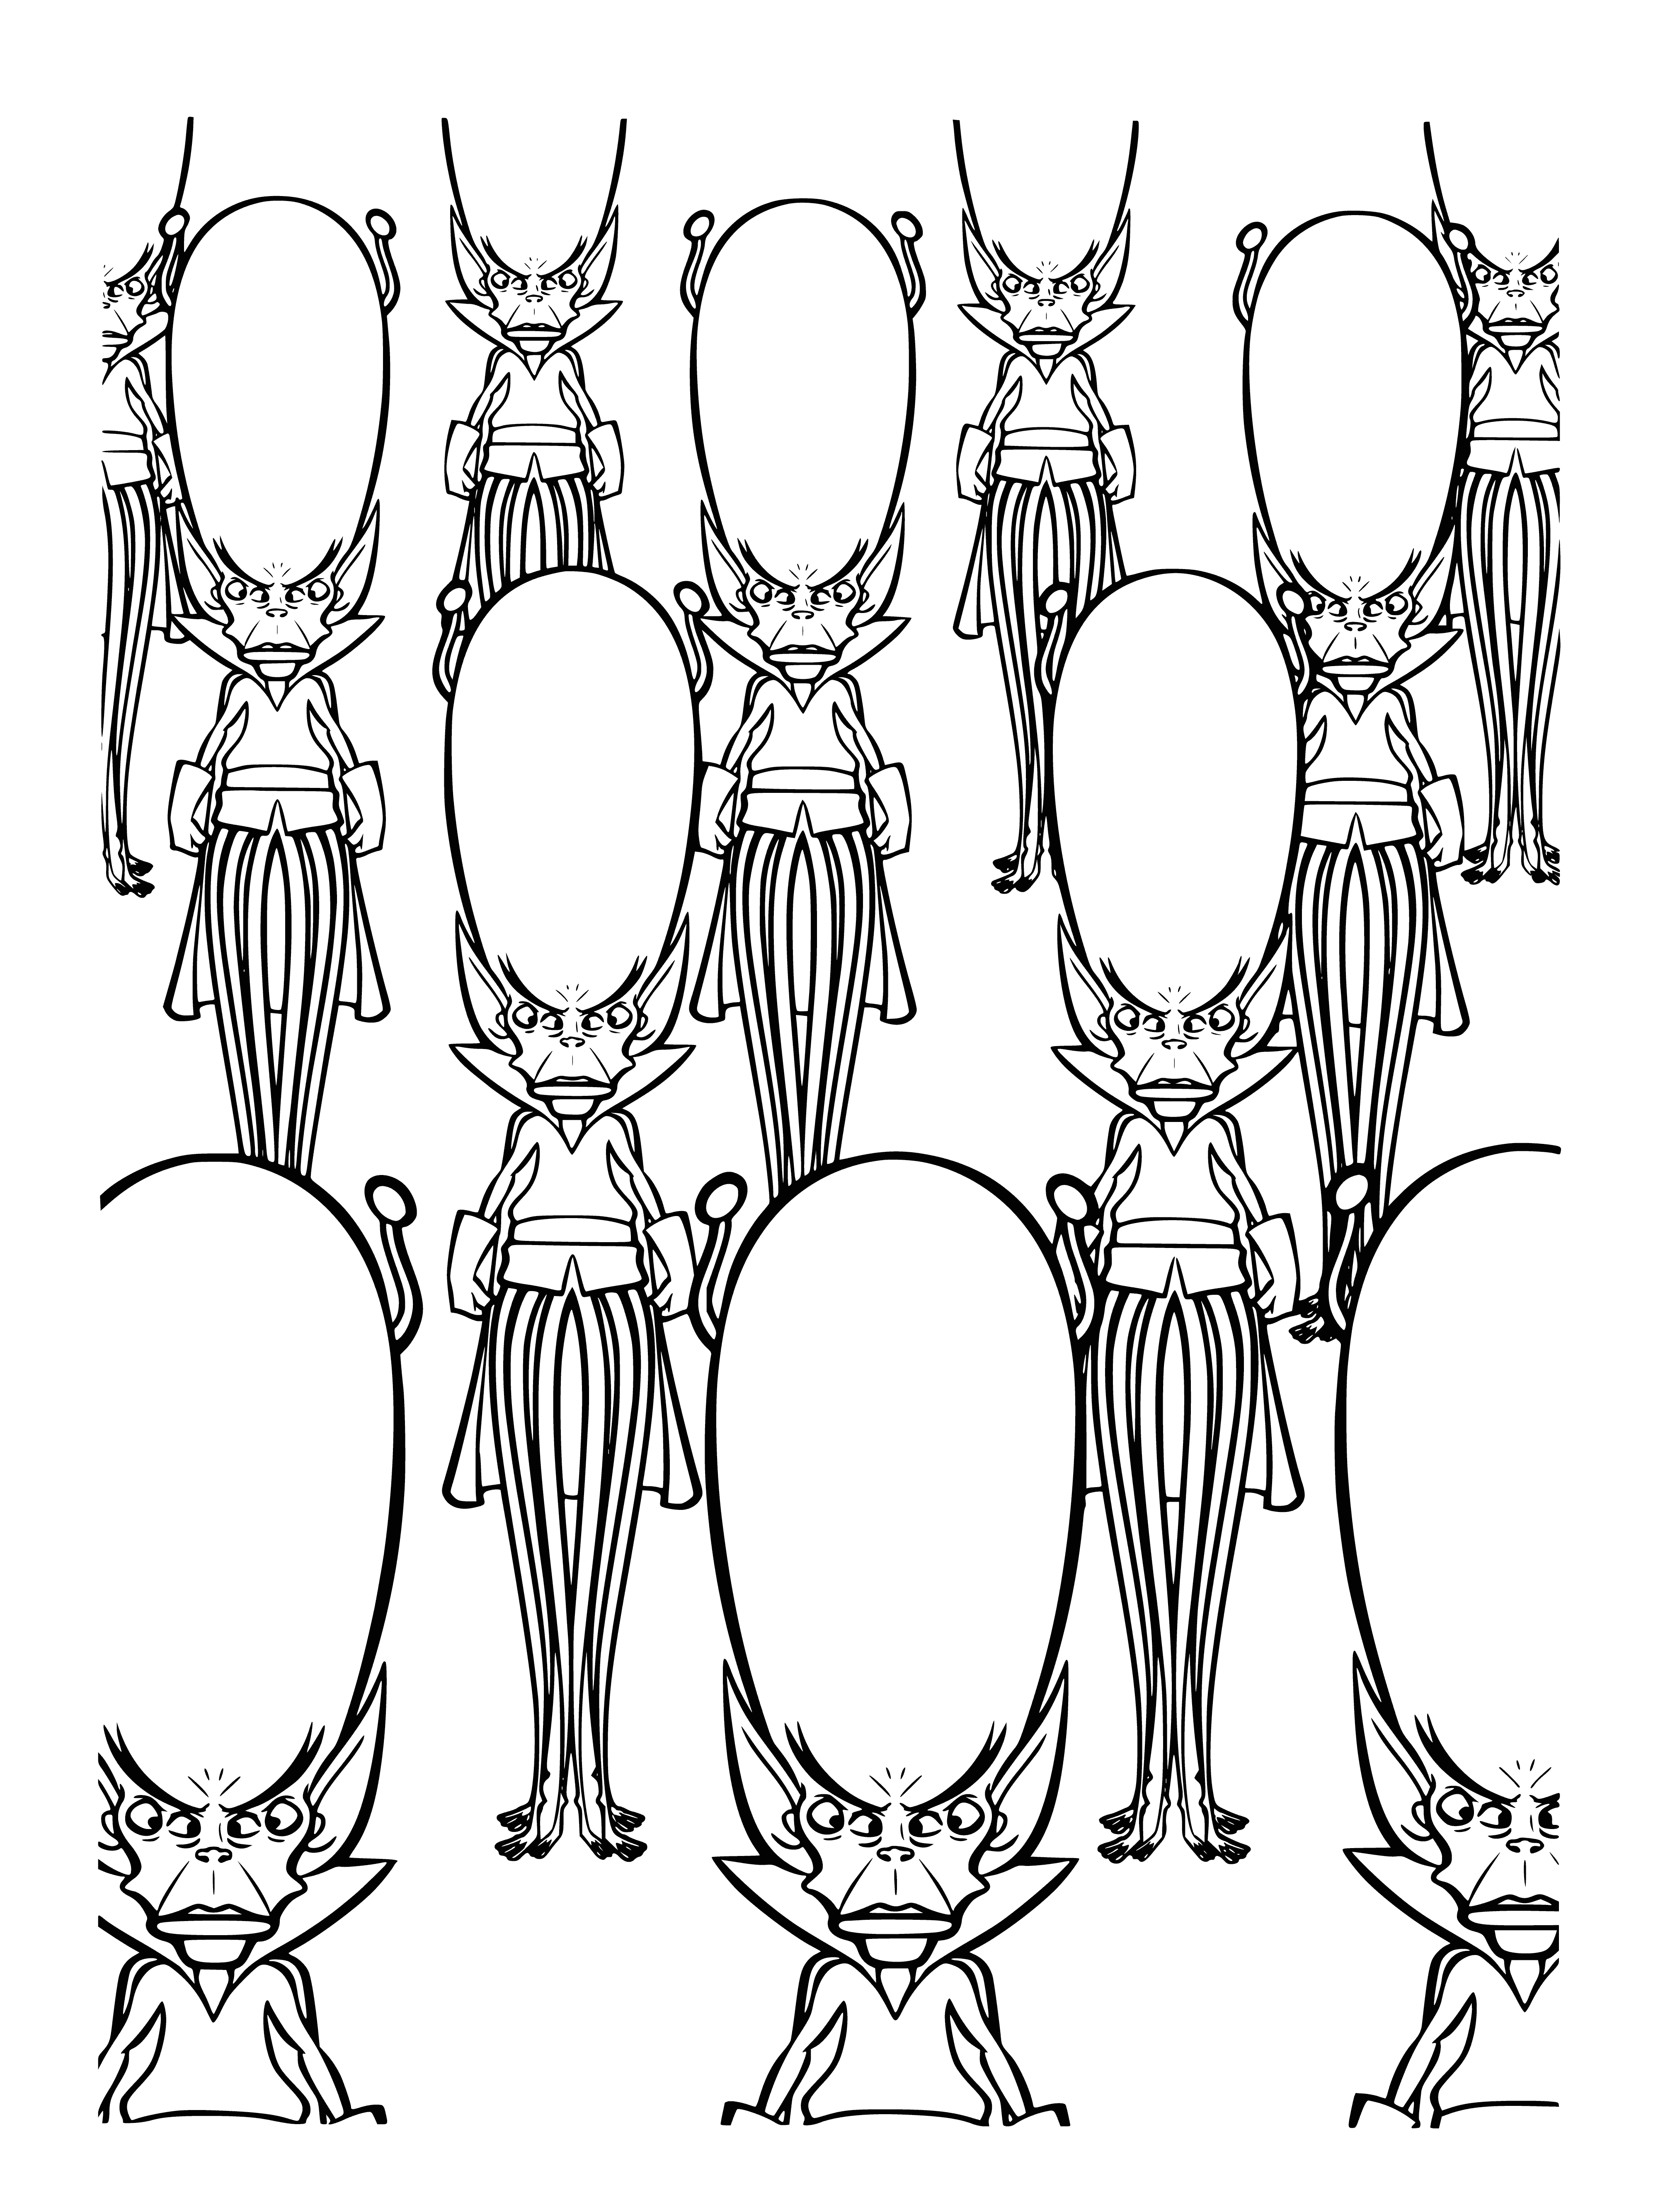 Clones of Galactosar coloring page